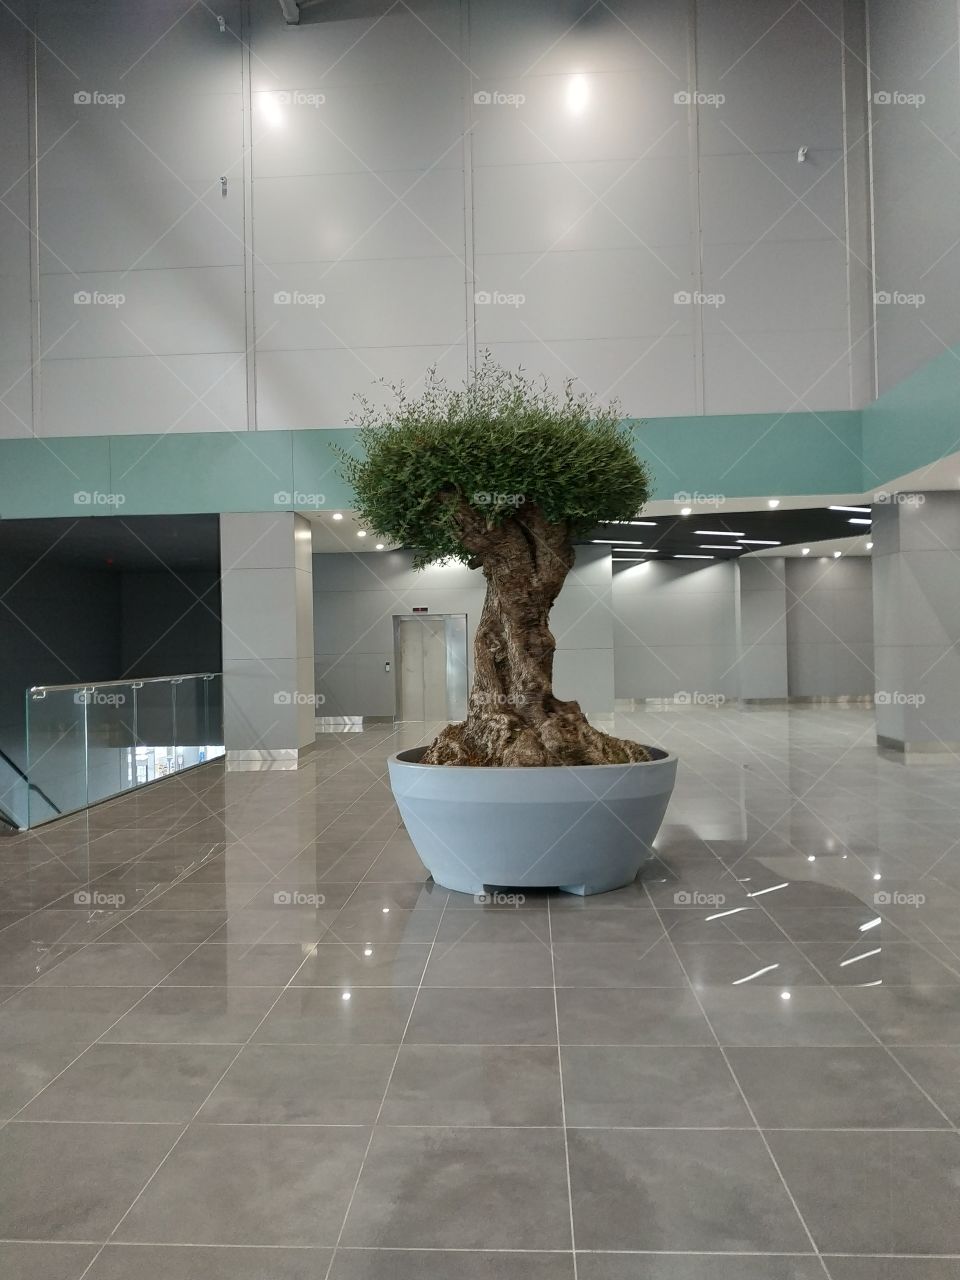 olive tree in Odesa new airport terminal